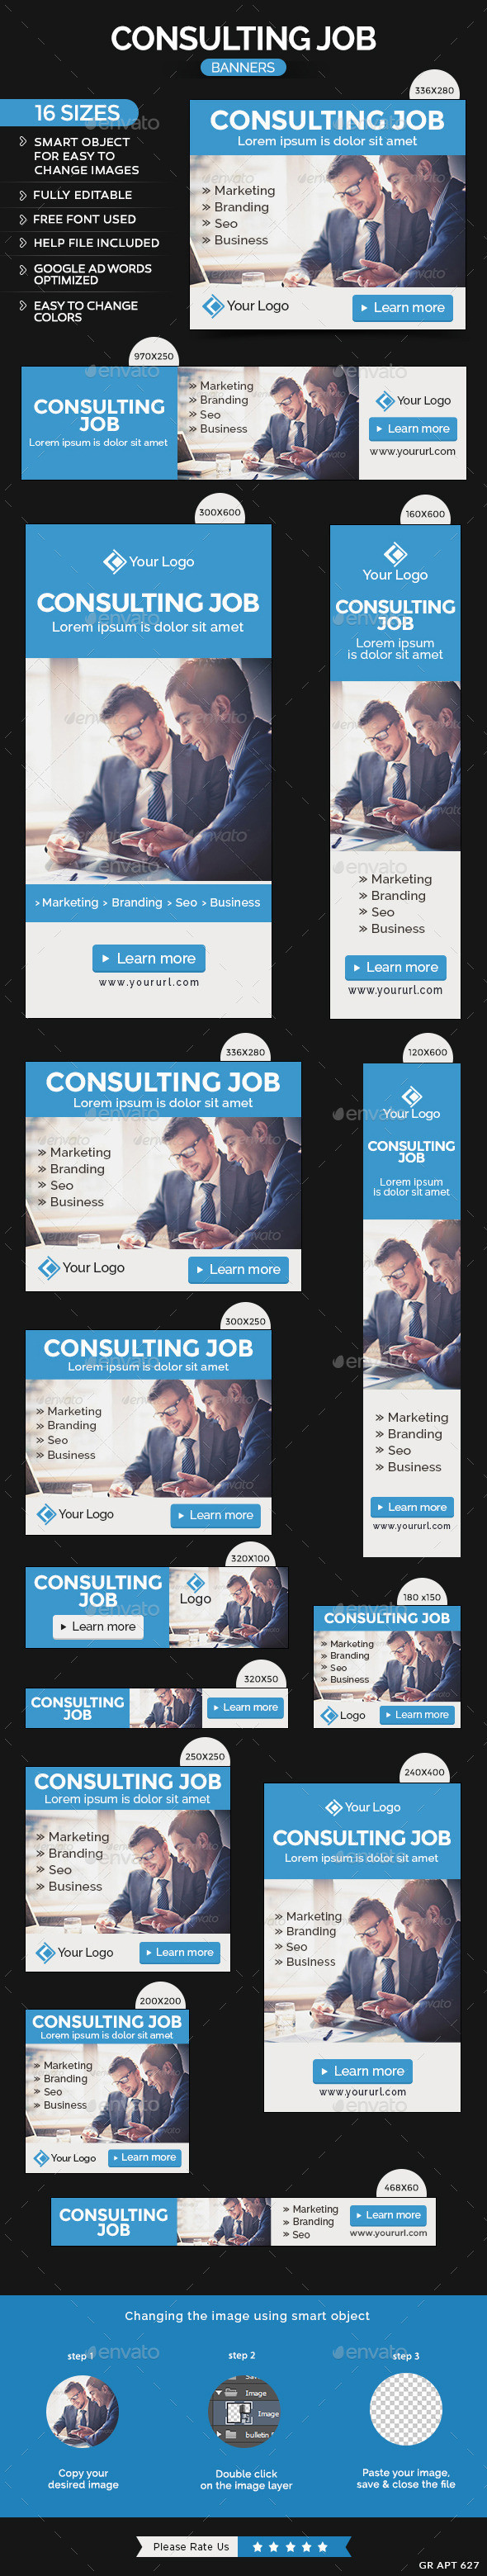 Apt 627 consulting 20job 20banners preview